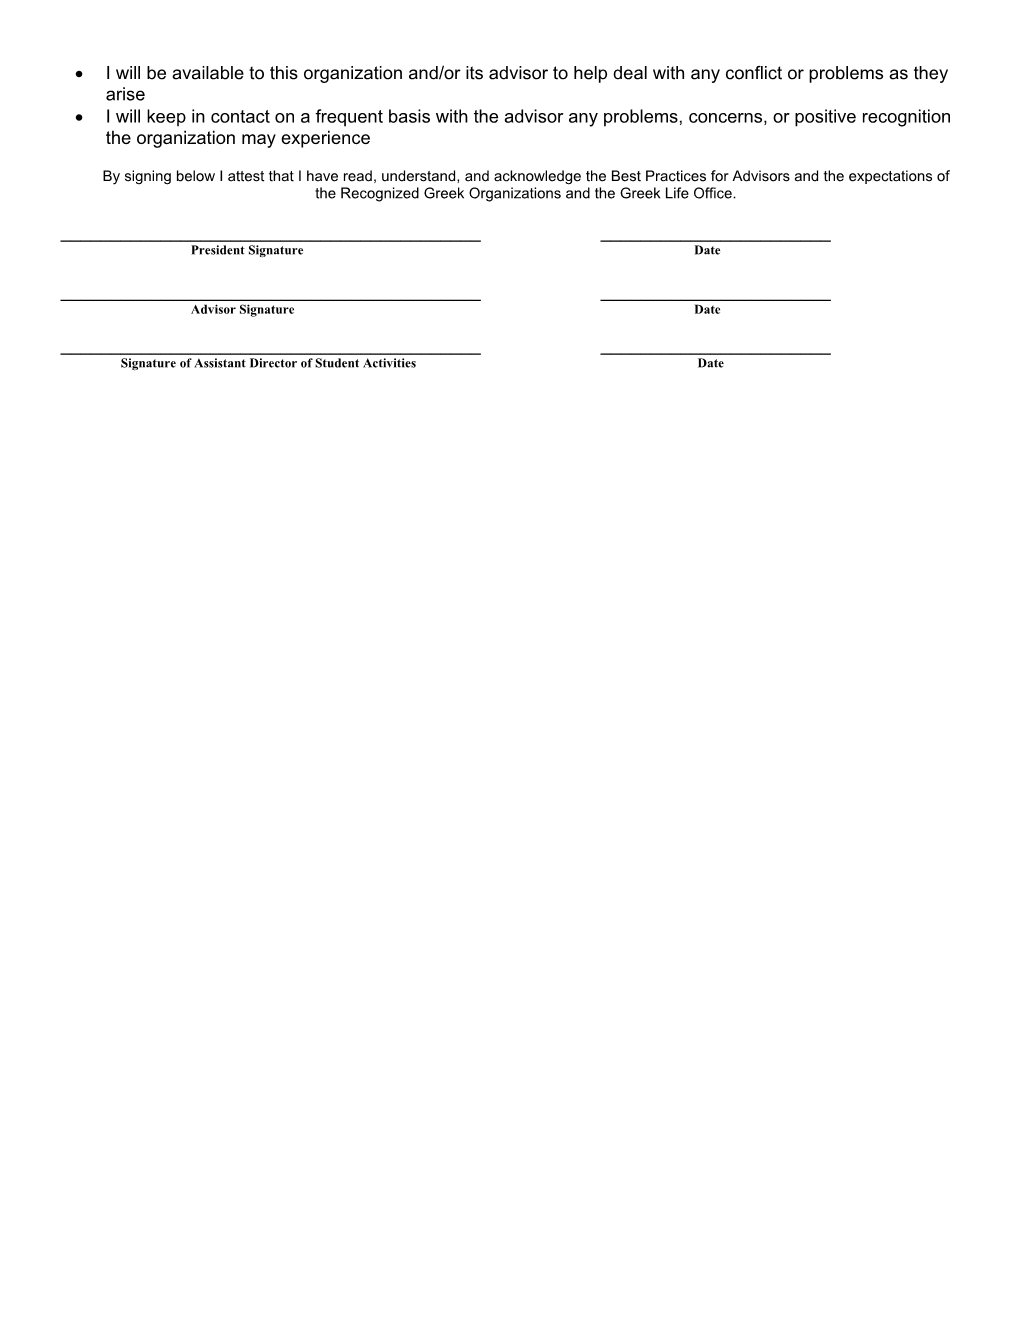 This Form Is to Be Completed by the Advisor and Submitted to the Greek Life Office